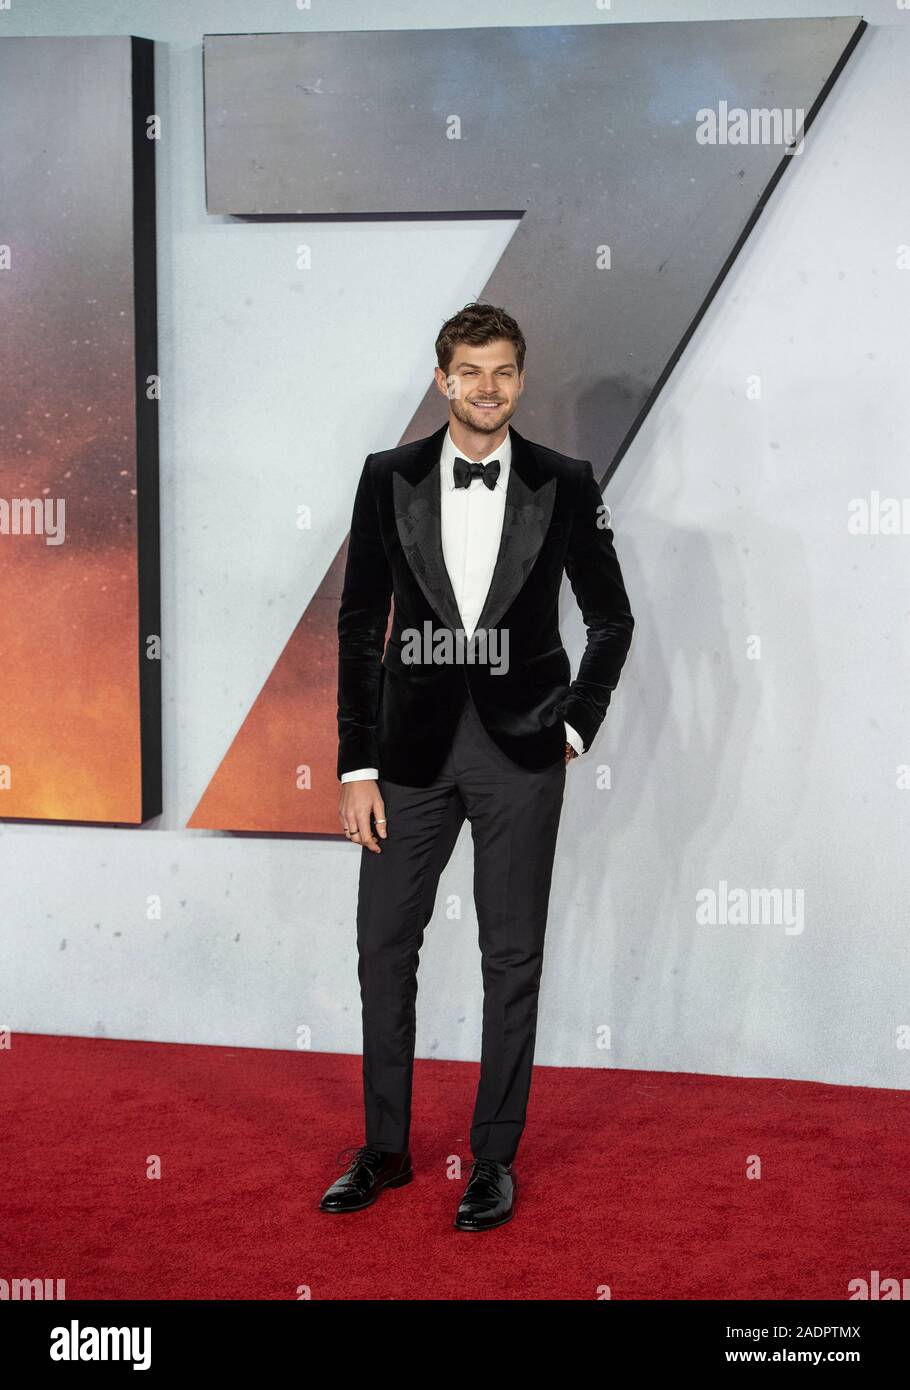 London, UK. 04th Dec, 2019. LONDON, ENGLAND - DECEMBER 04: Jim Chapman attends the World Premiere and Royal Performance of "1917" at Odeon Luxe Leicester Square on December 4, 2019 in London, England. Credit: Gary Mitchell, GMP Media/Alamy Live News Stock Photo